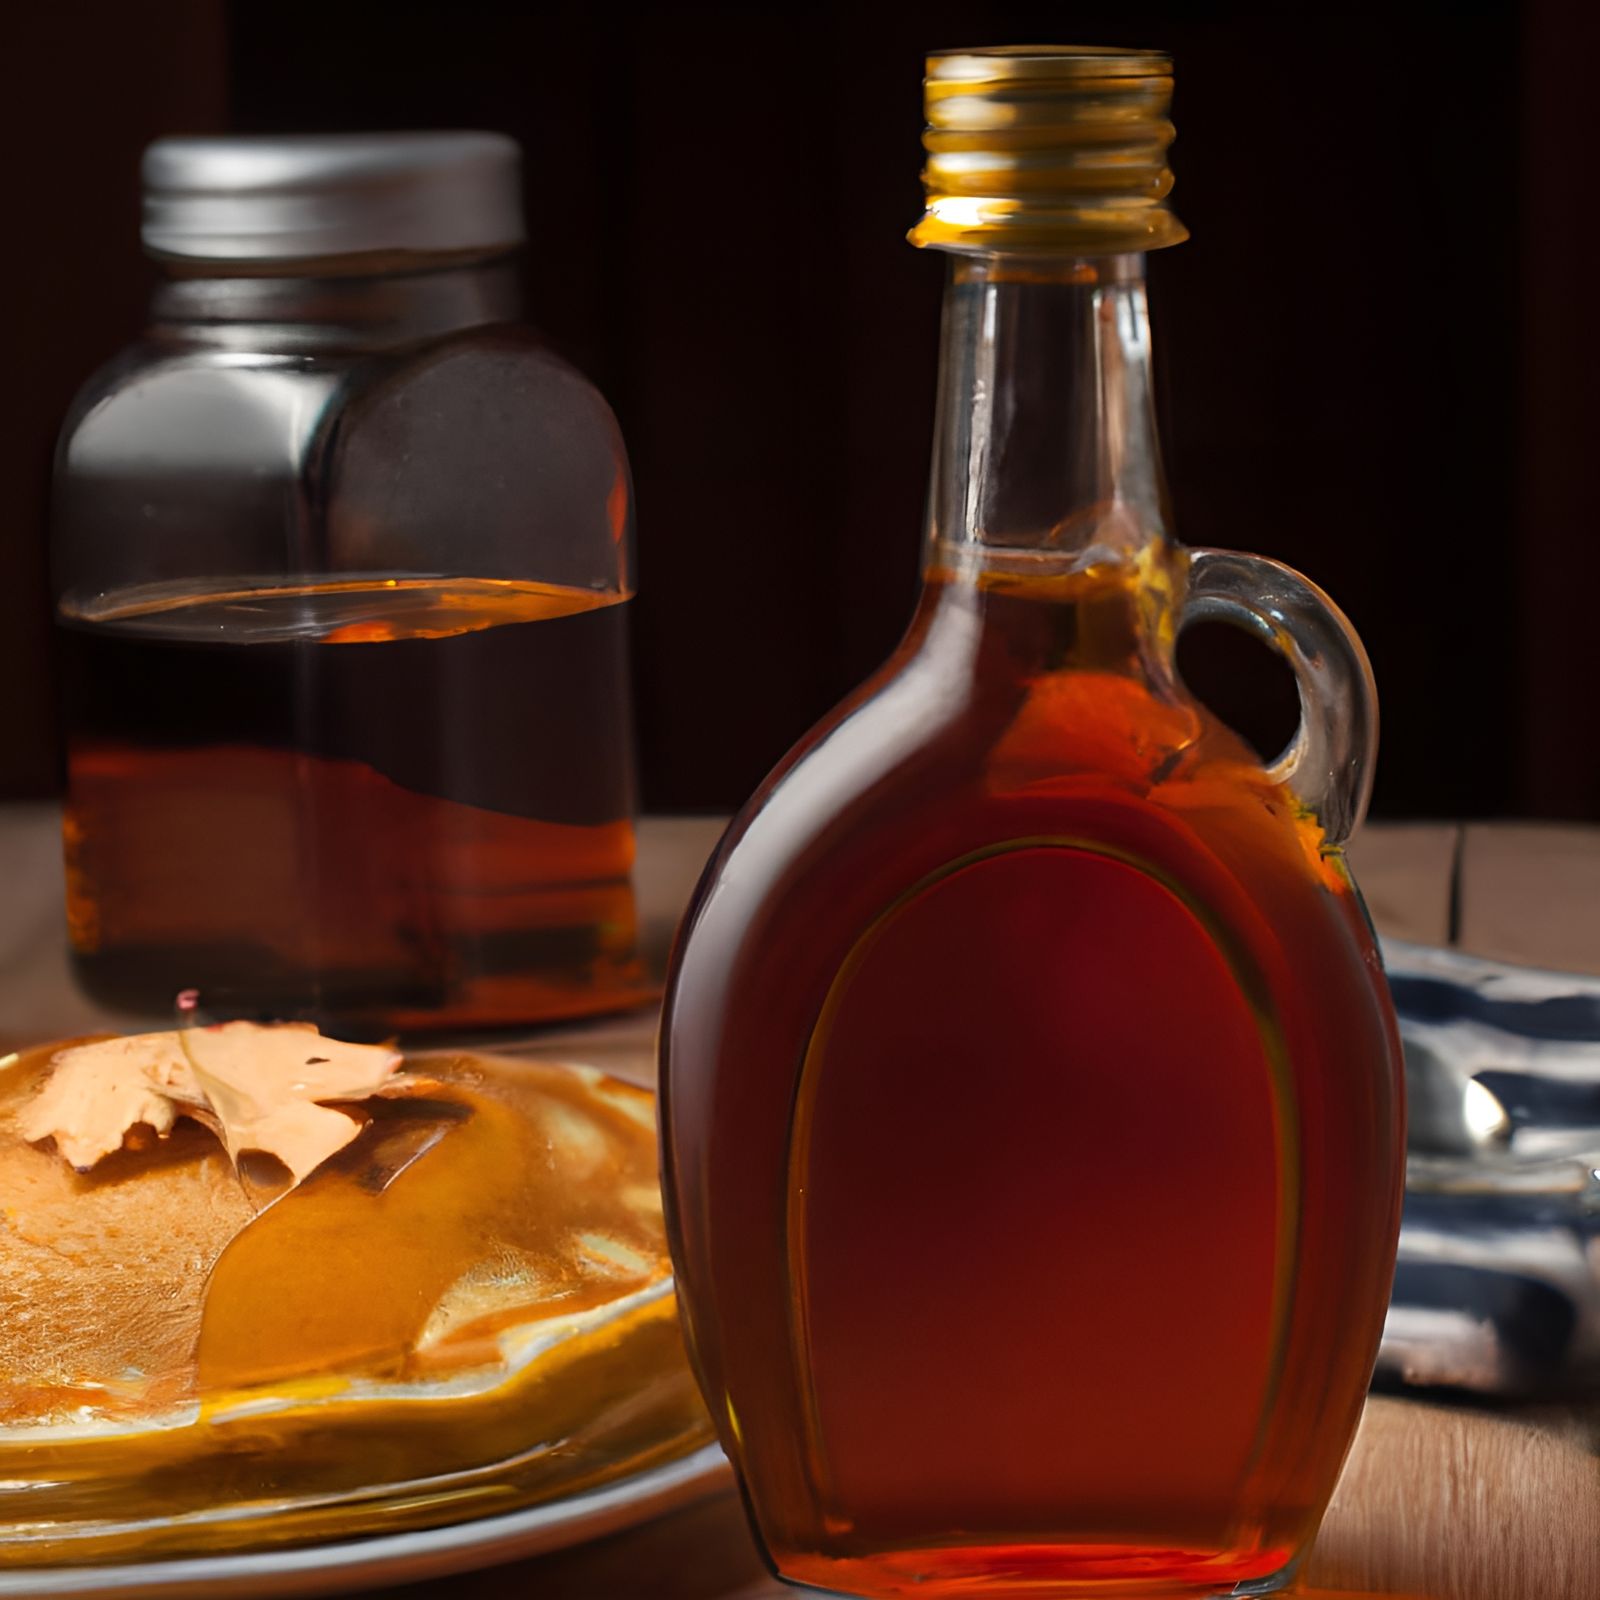 Maple Syrup Bottle On Table With Pancakes